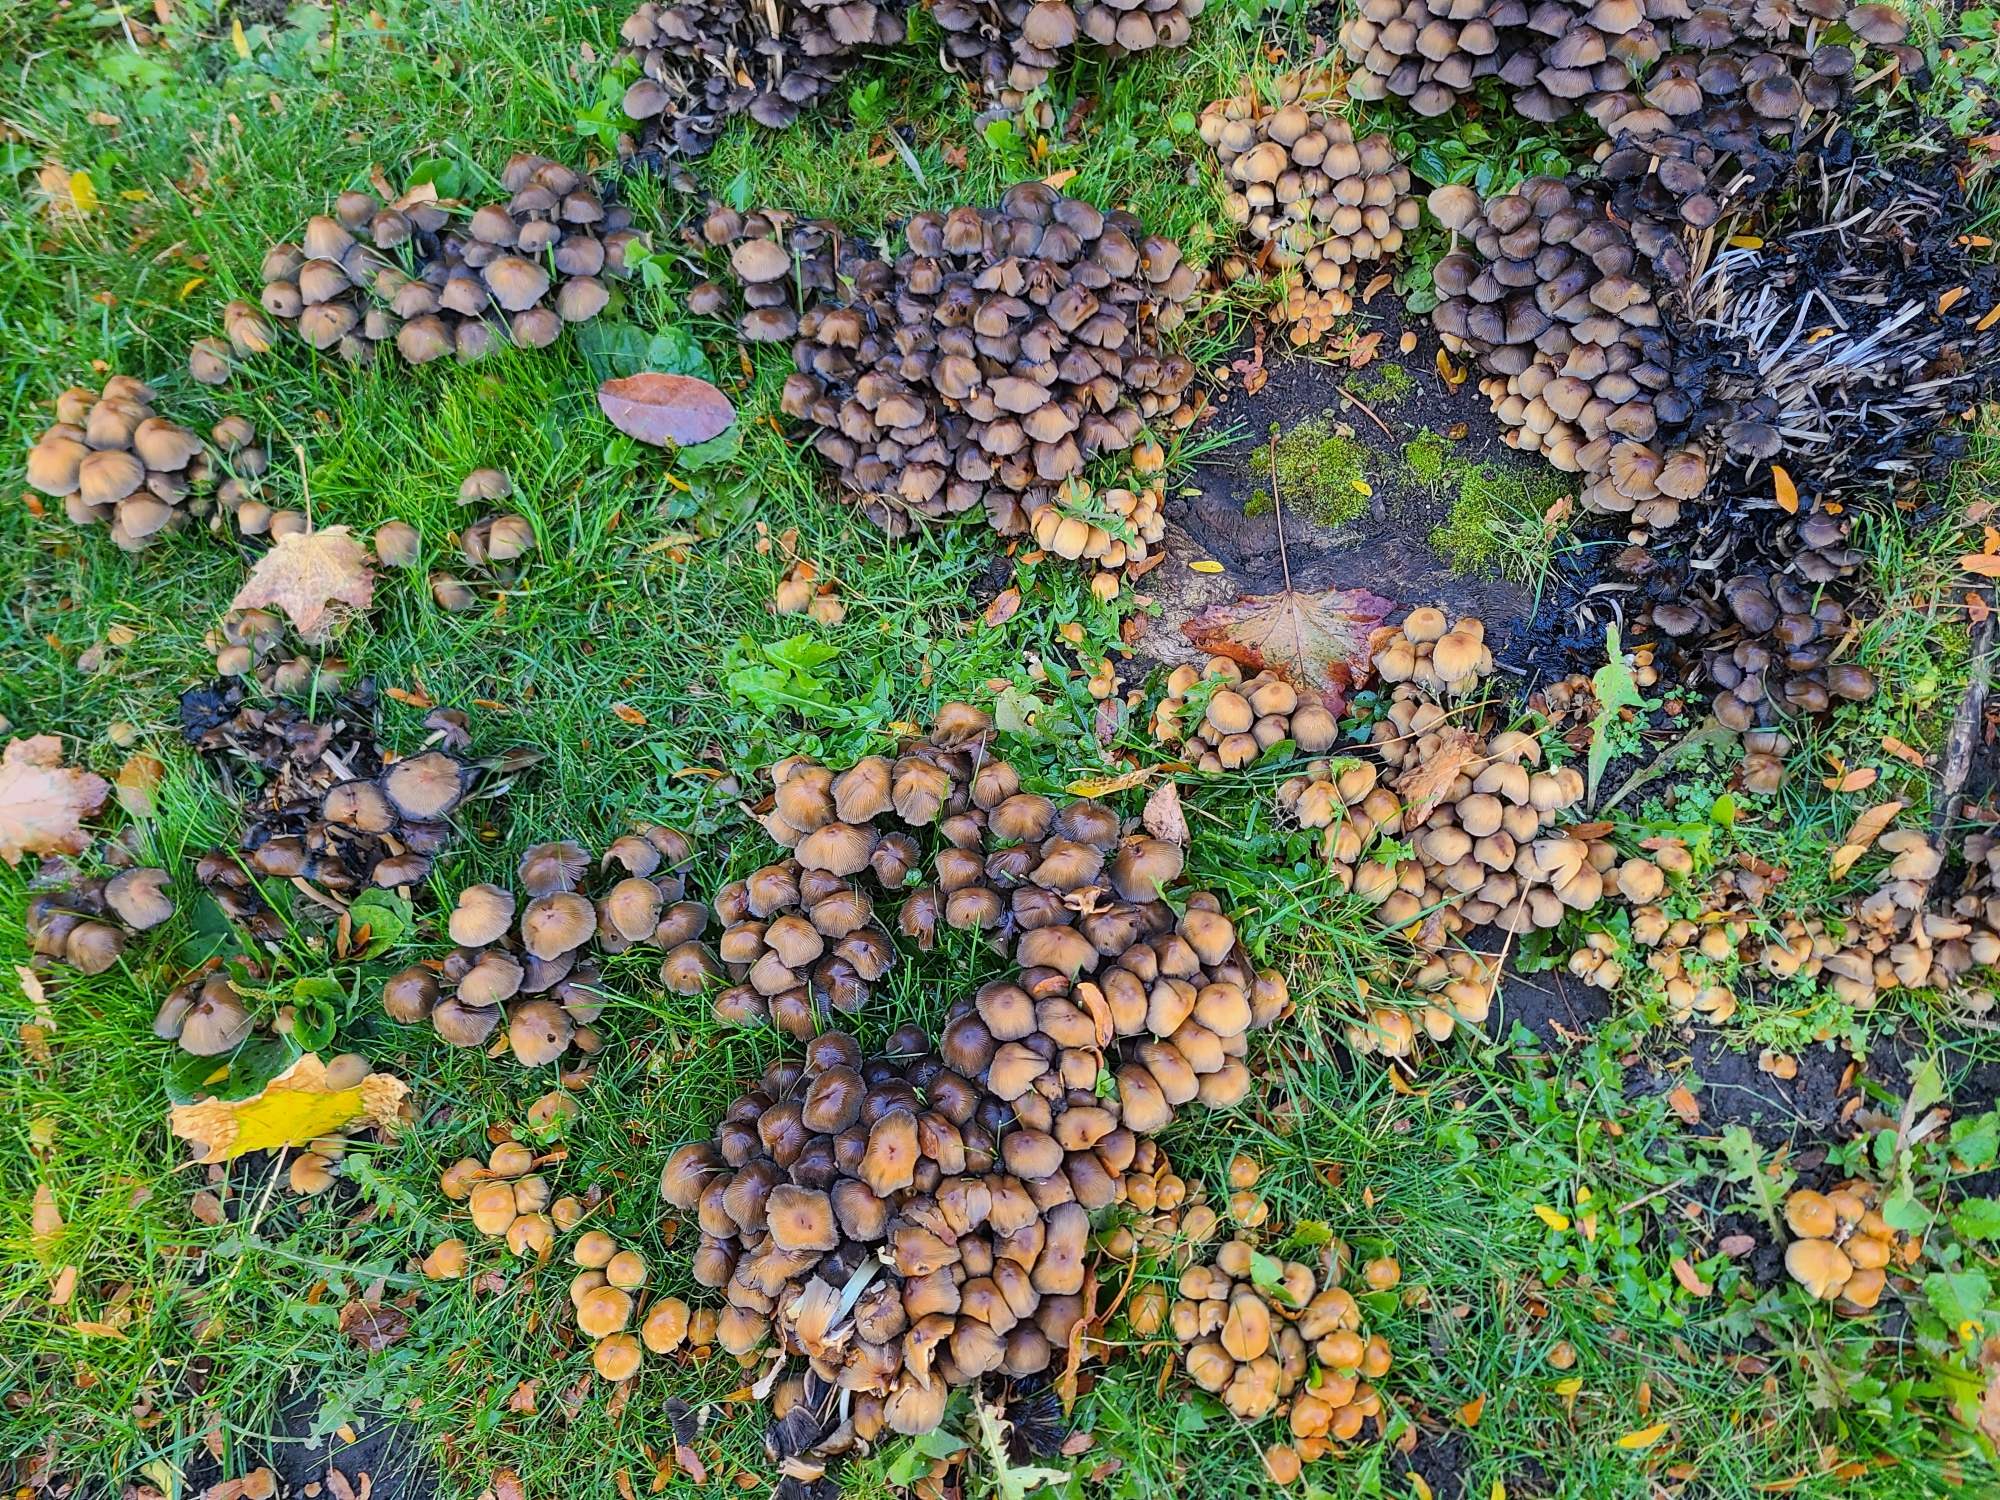 Variety of mushrooms growing in the grass